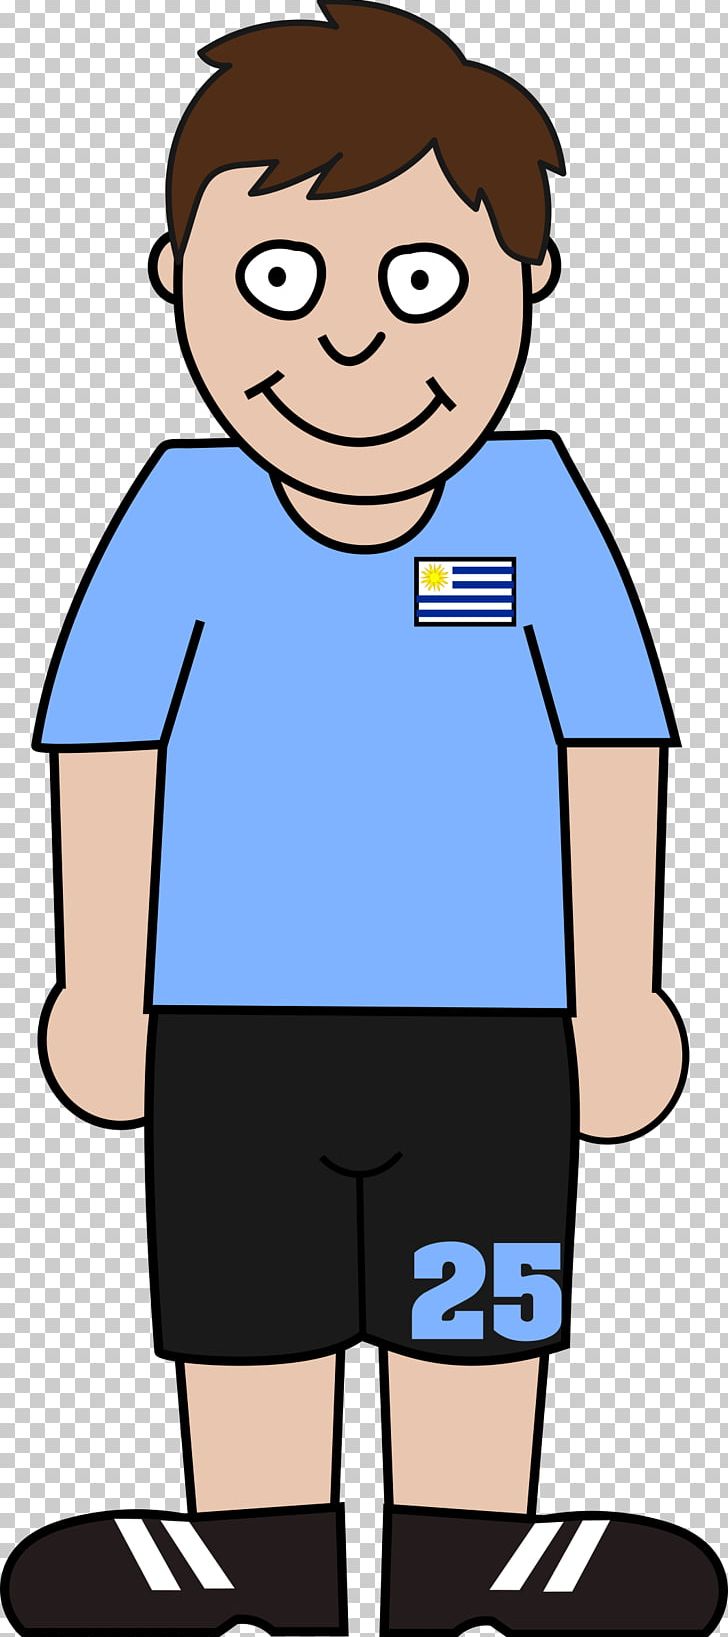 2018 World Cup Uruguay National Football Team Croatia National Football Team Switzerland National Football Team France National Football Team PNG, Clipart, Arm, Boy, Child, Fictional Character, Football Player Free PNG Download